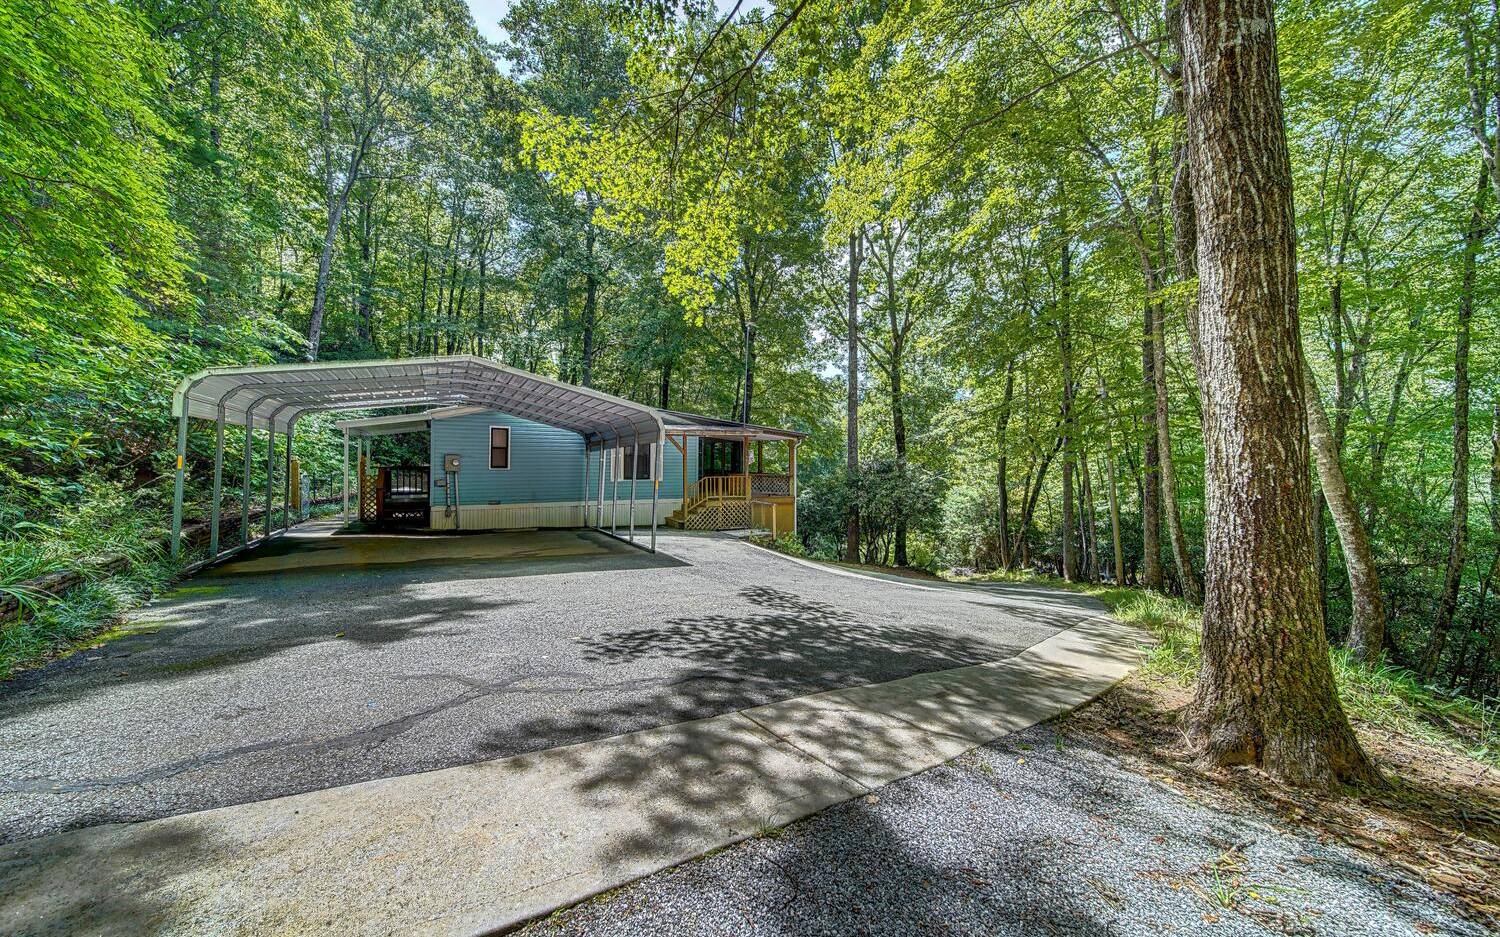 Super clean and neat 2BR/2BA manufactured home on 1.87 acres that Fronts US National Forest Property. Paved all the way to the home. Listen to the waterfall that is on this property that you can hear from the large screened porch. This home has Central Heat & AC new in 2020, newer SS Appliances, laminate floors and new fixtures, fans,sinks and Toilets. Very private location is quiet and like being in a treehouse. Seasonal Mountain views. You will LOVE this wonderful getaway place or live in it full time. Small workbench under deck, fenced dog area and storage shed. Selling CASH ONLY and " As Is"